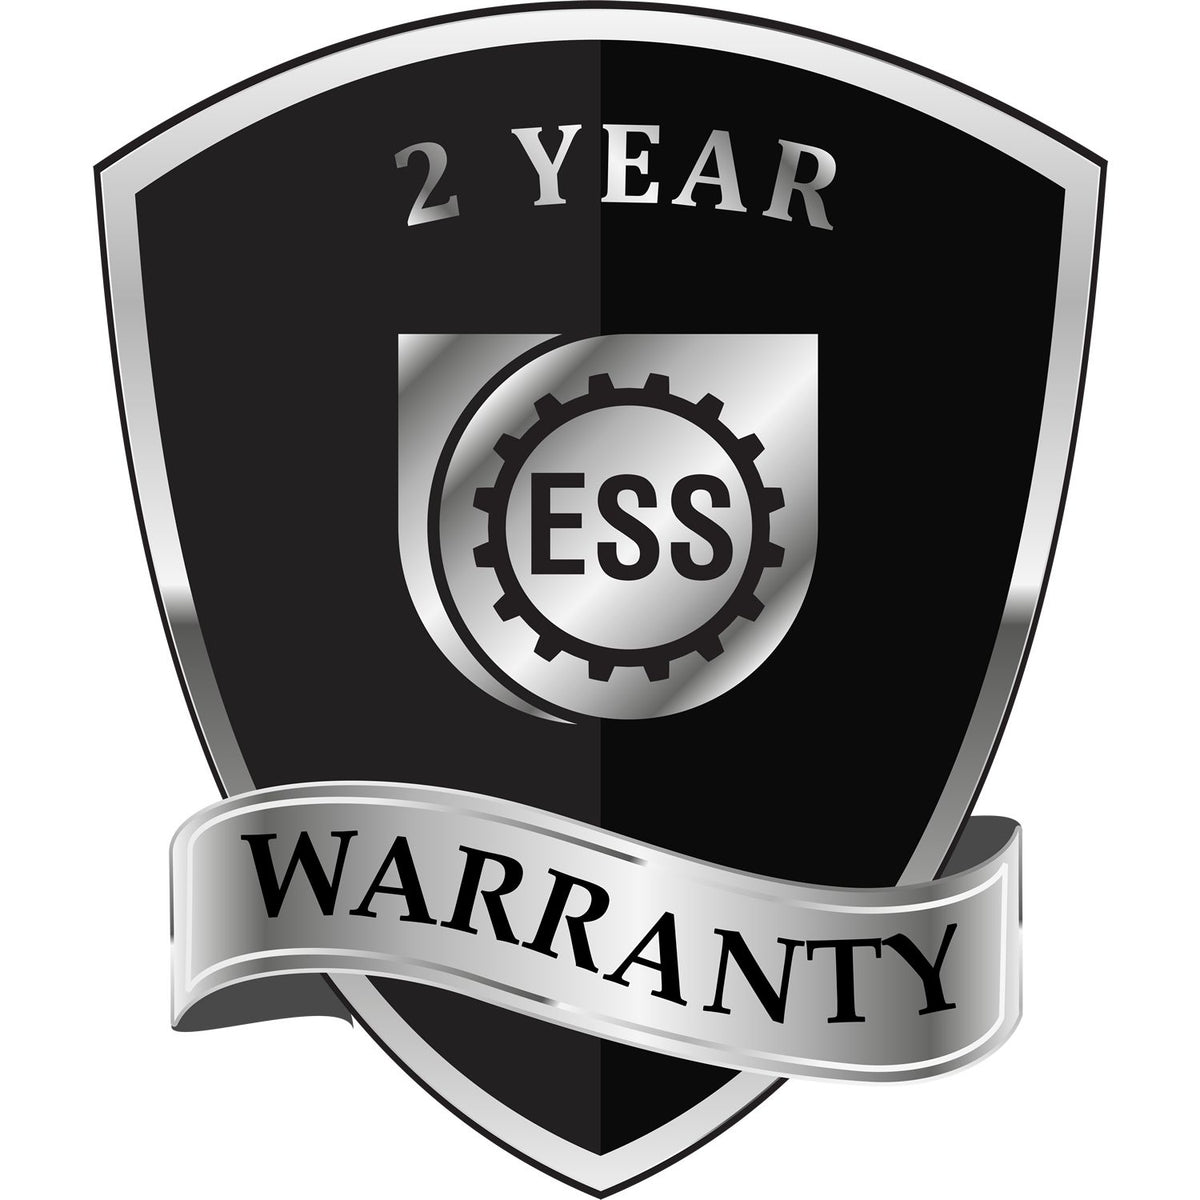 A black and silver badge or emblem showing warranty information for the Gift Maine Land Surveyor Seal